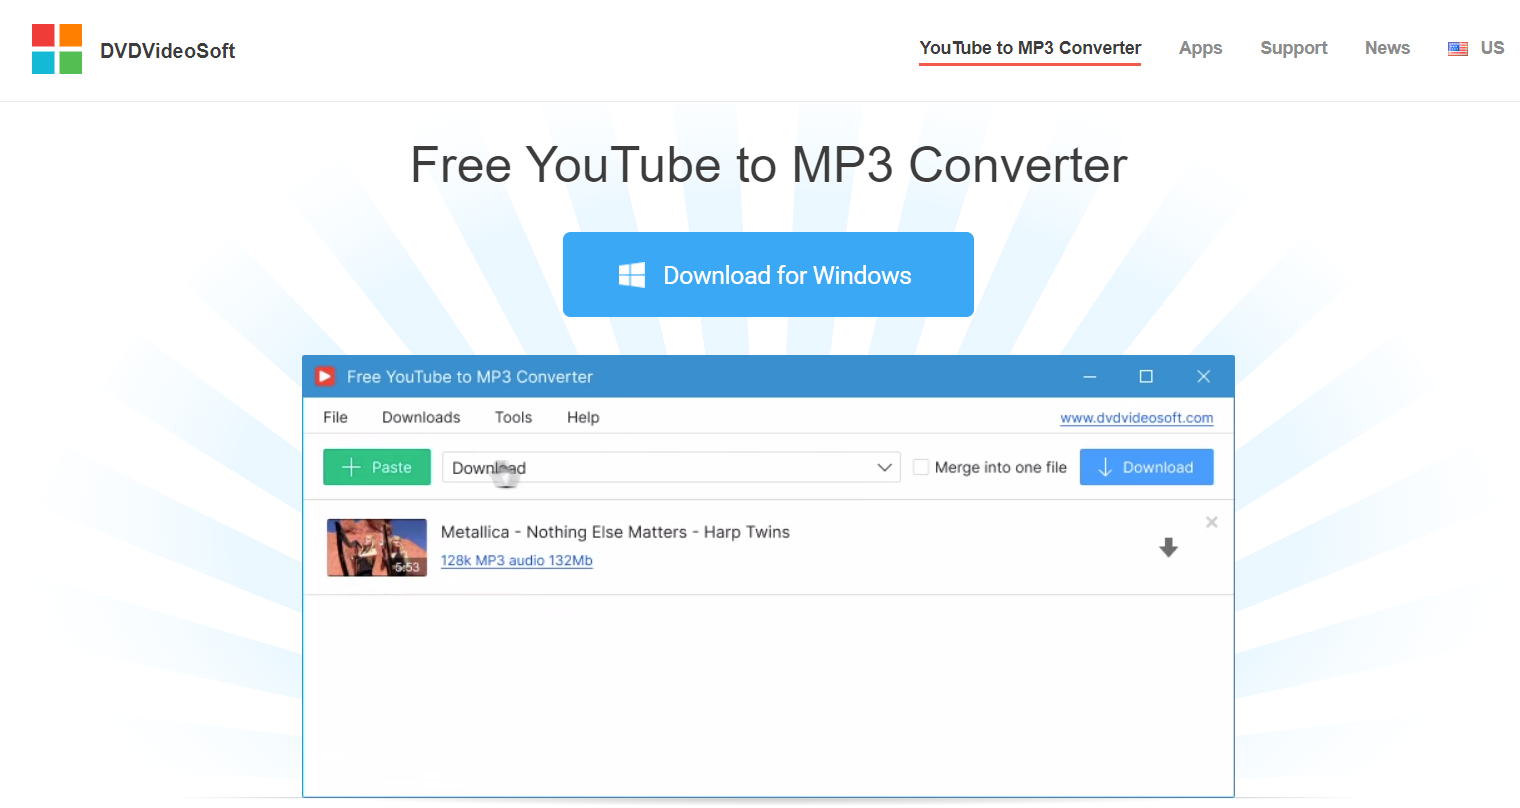 Free YouTube to MP3 Converter (by DVDVideoSoft)